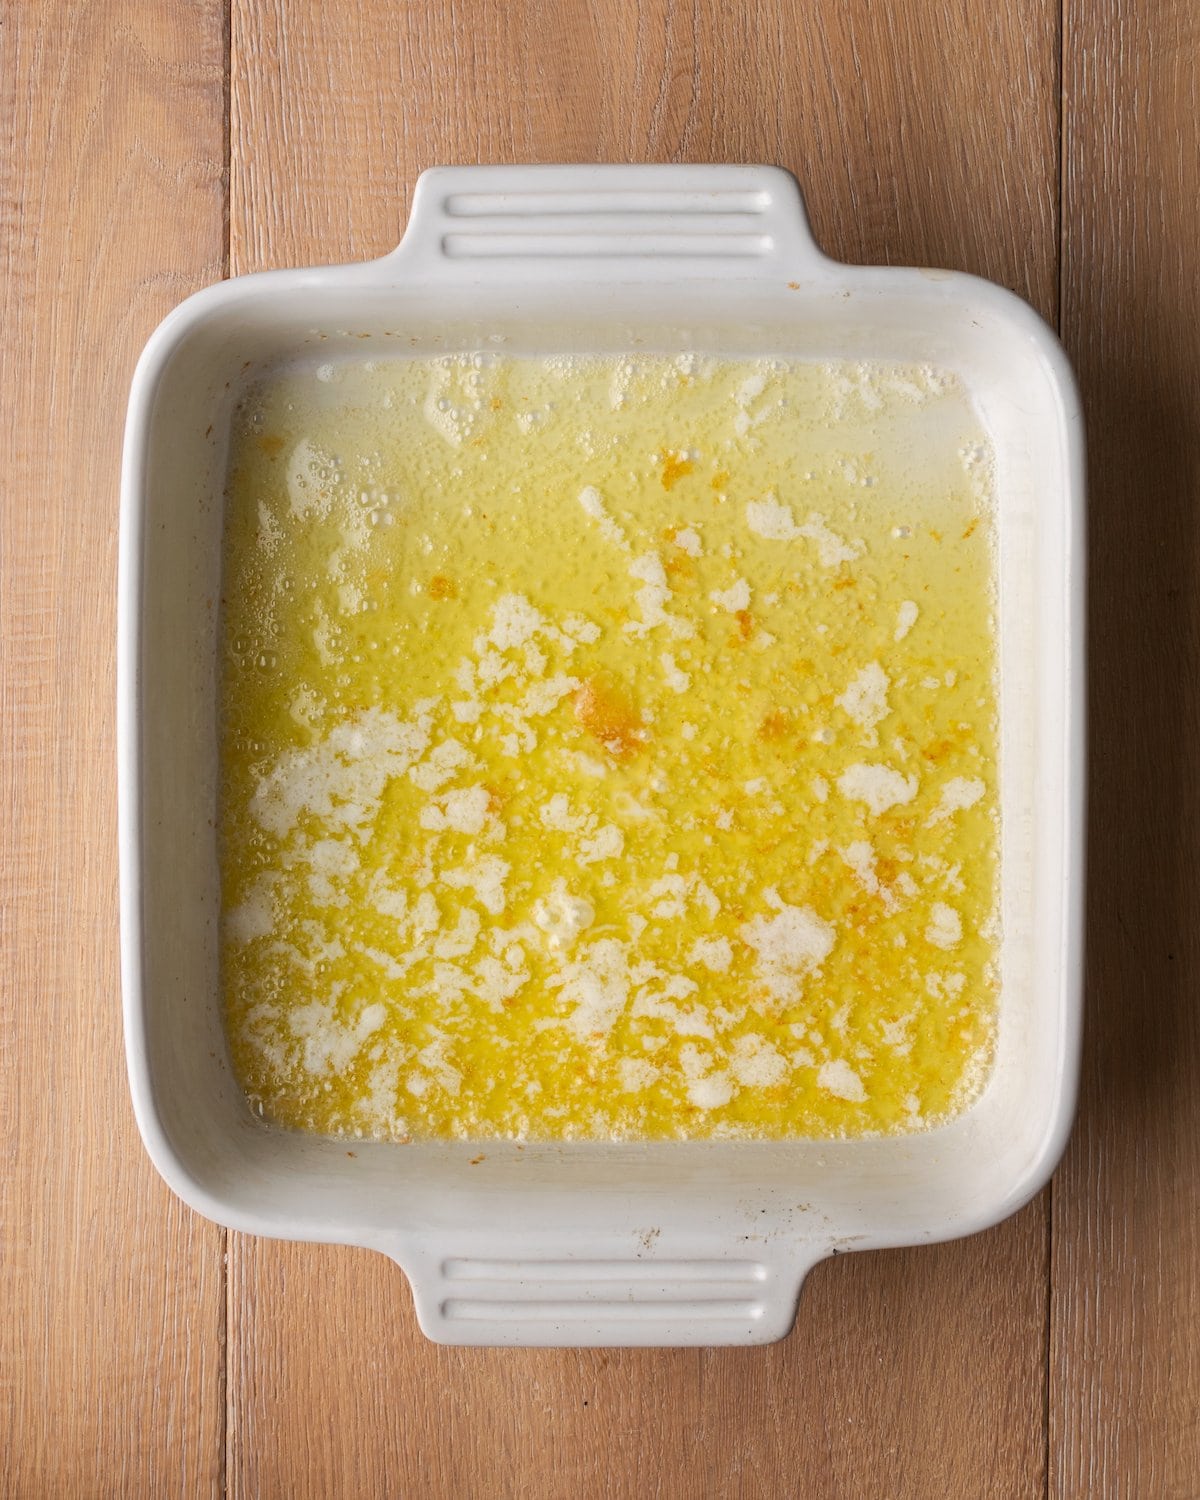 Melted butter in a square baking dish.